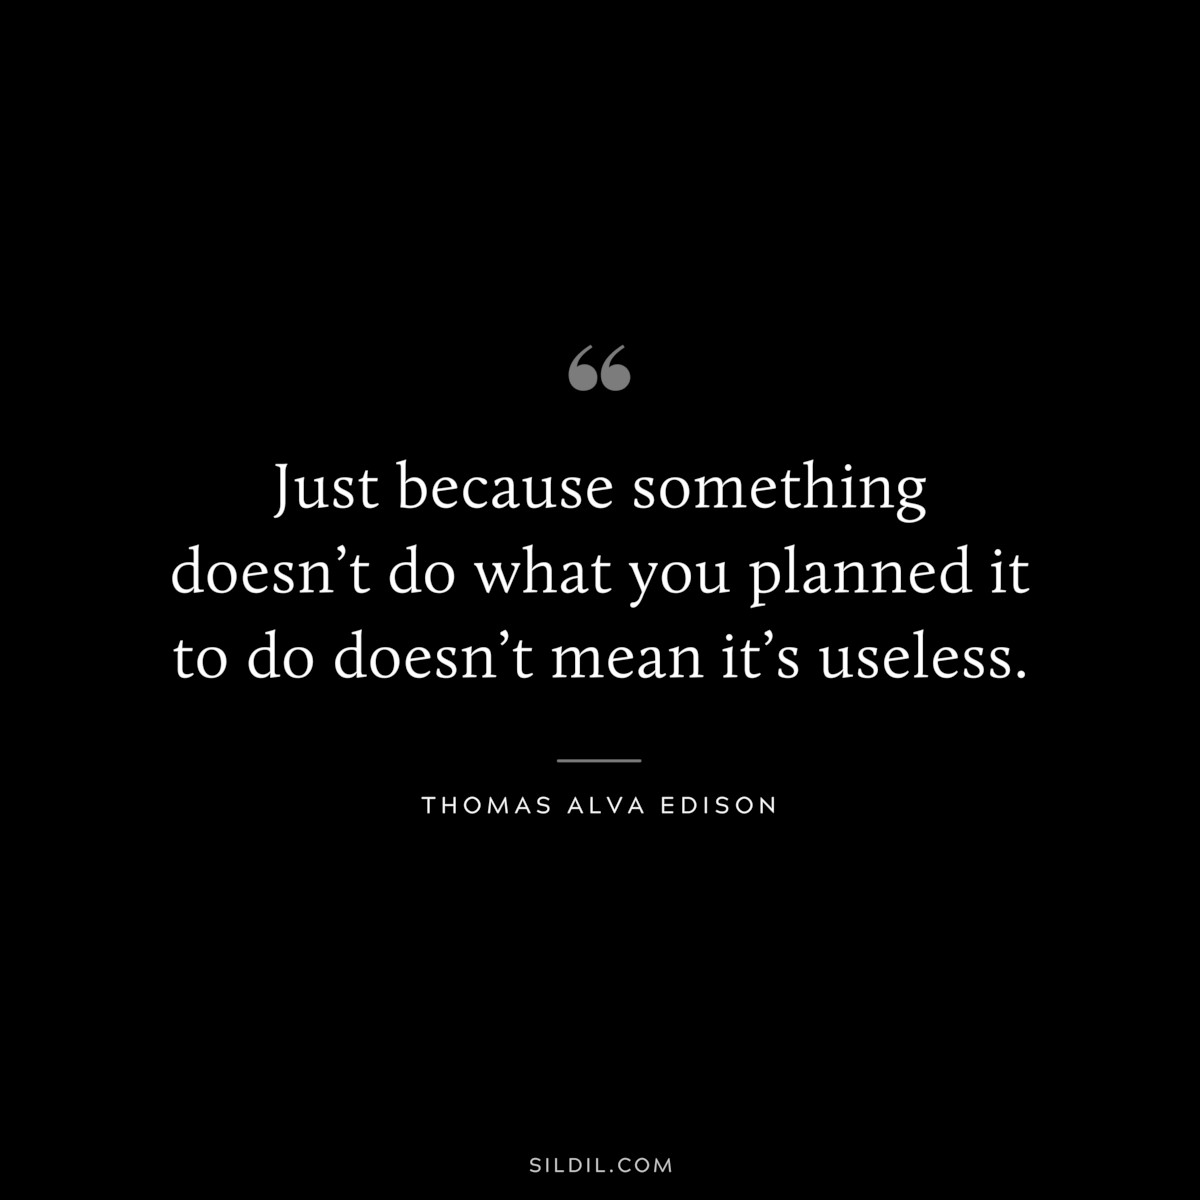 Just because something doesn’t do what you planned it to do doesn’t mean it’s useless. ― Thomas Alva Edison